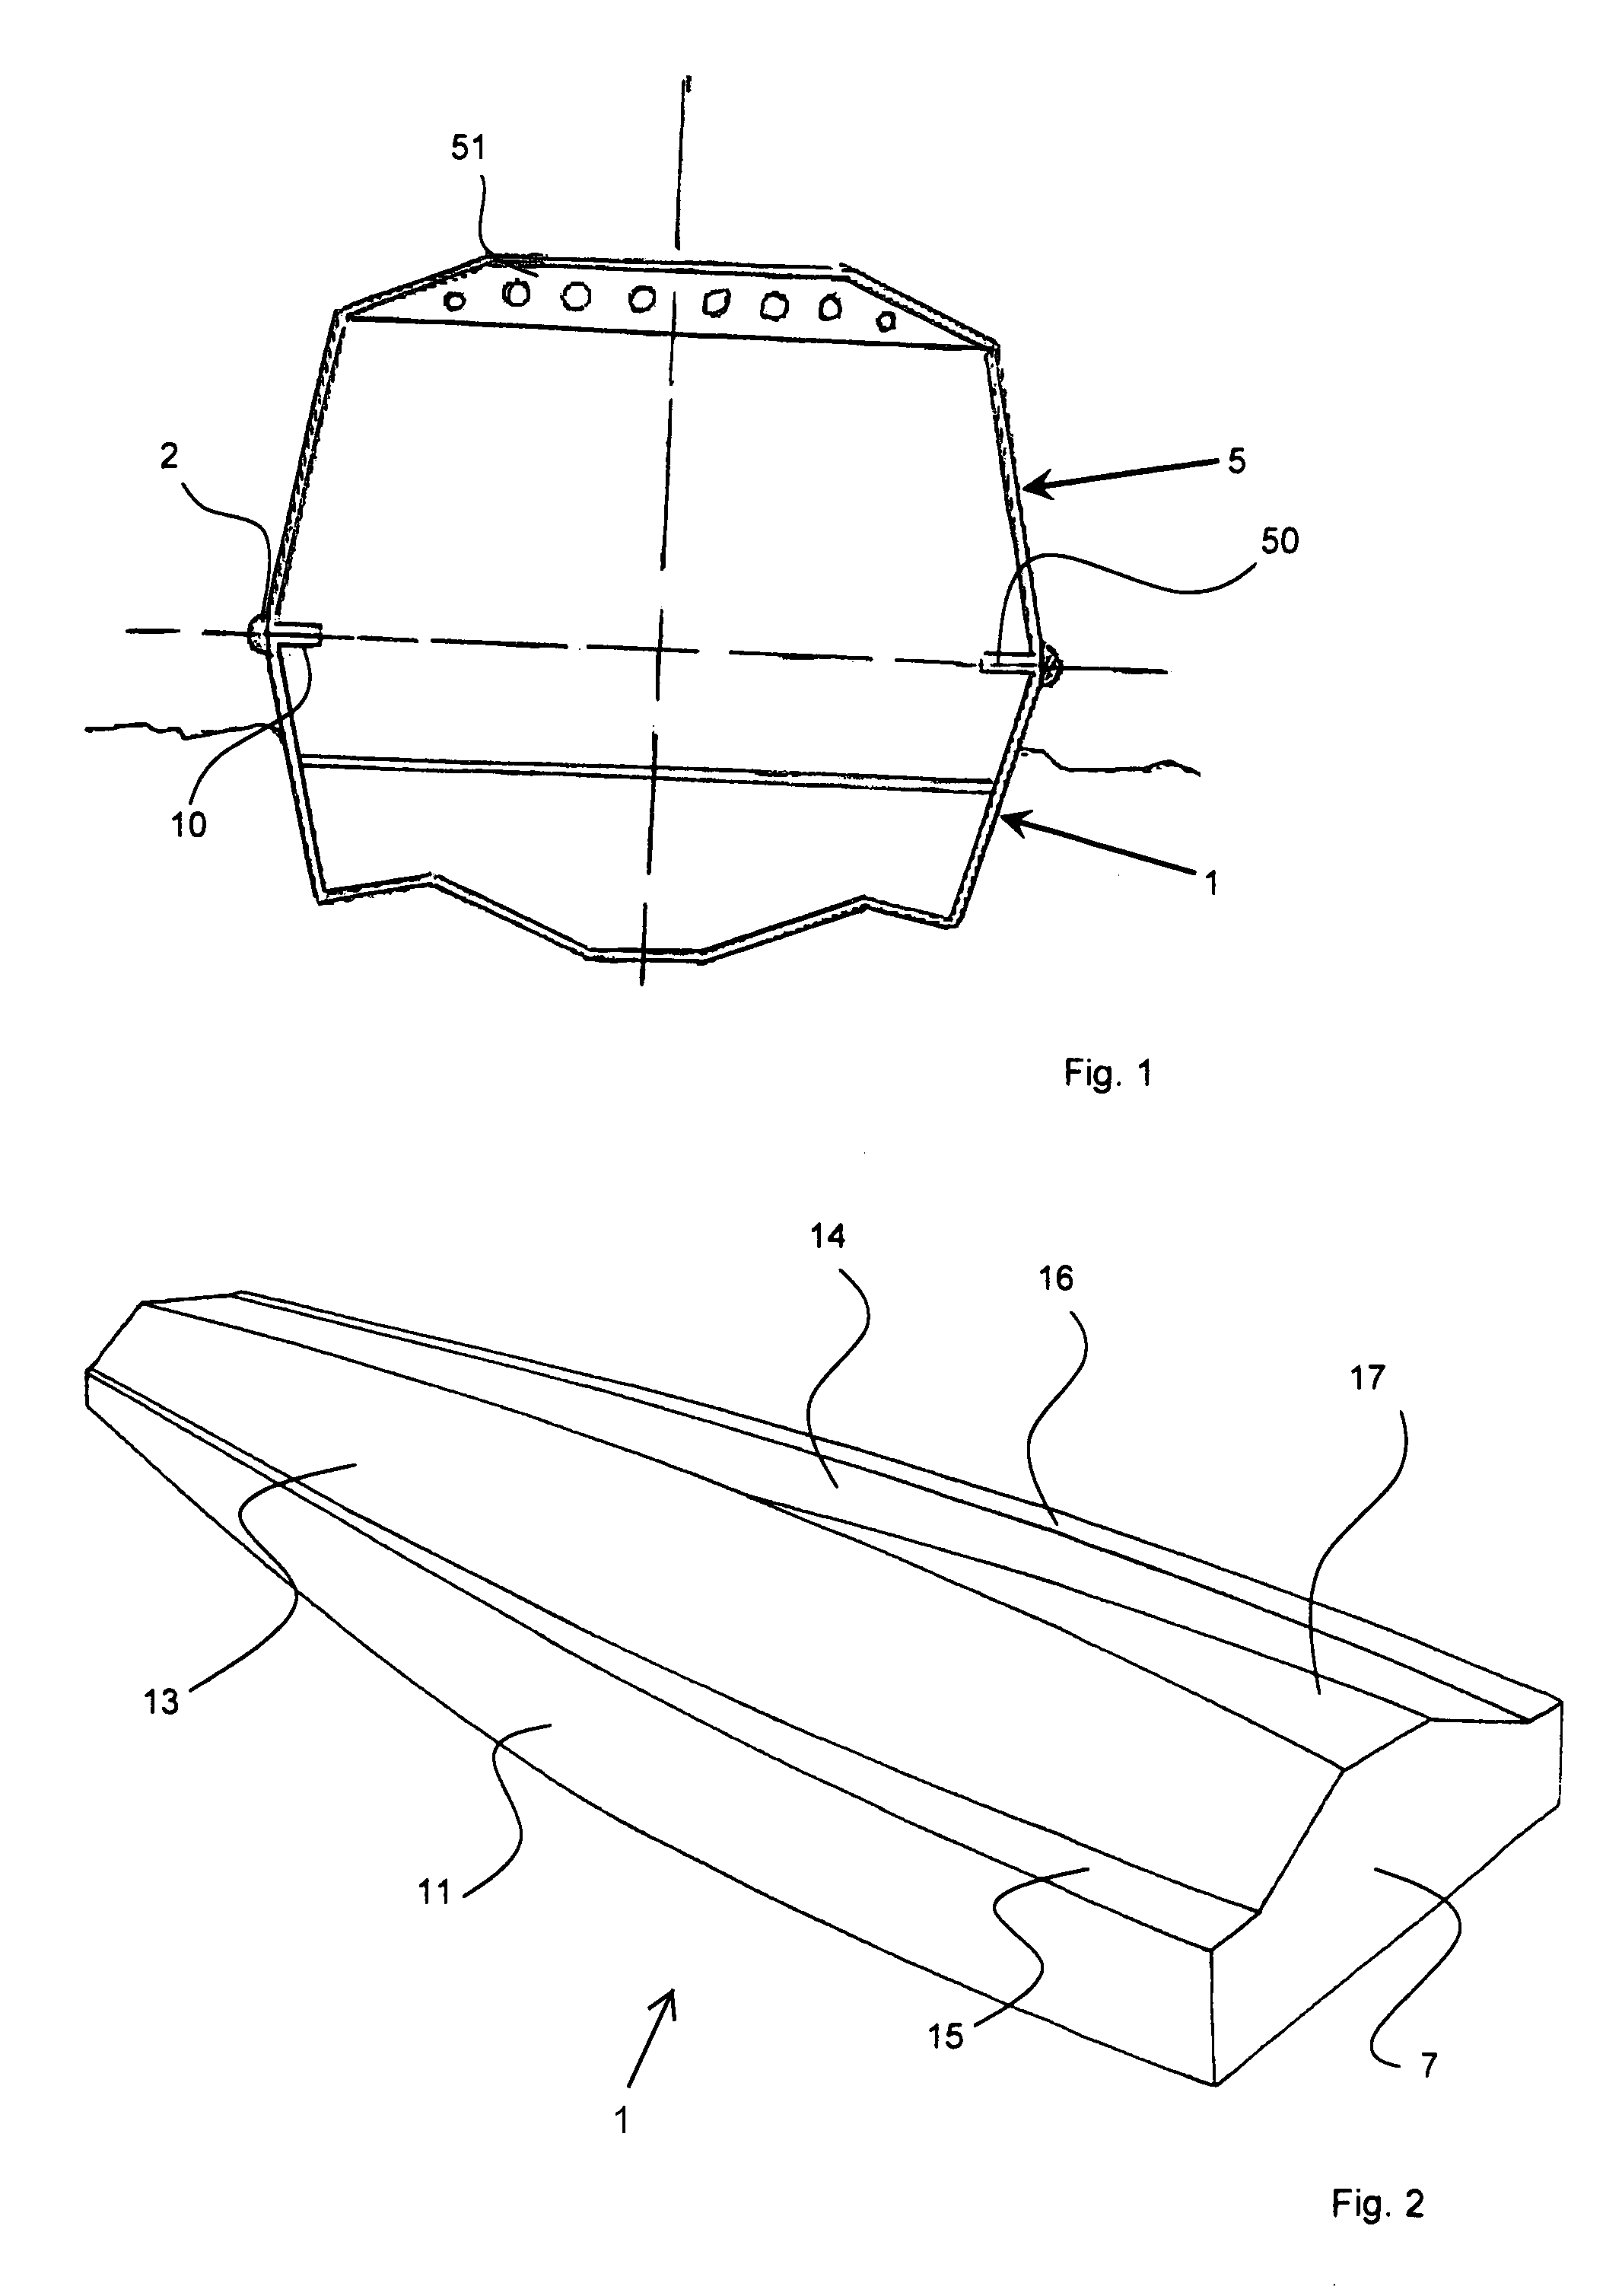 Boat or Ship Body of Aluminum-Based Material